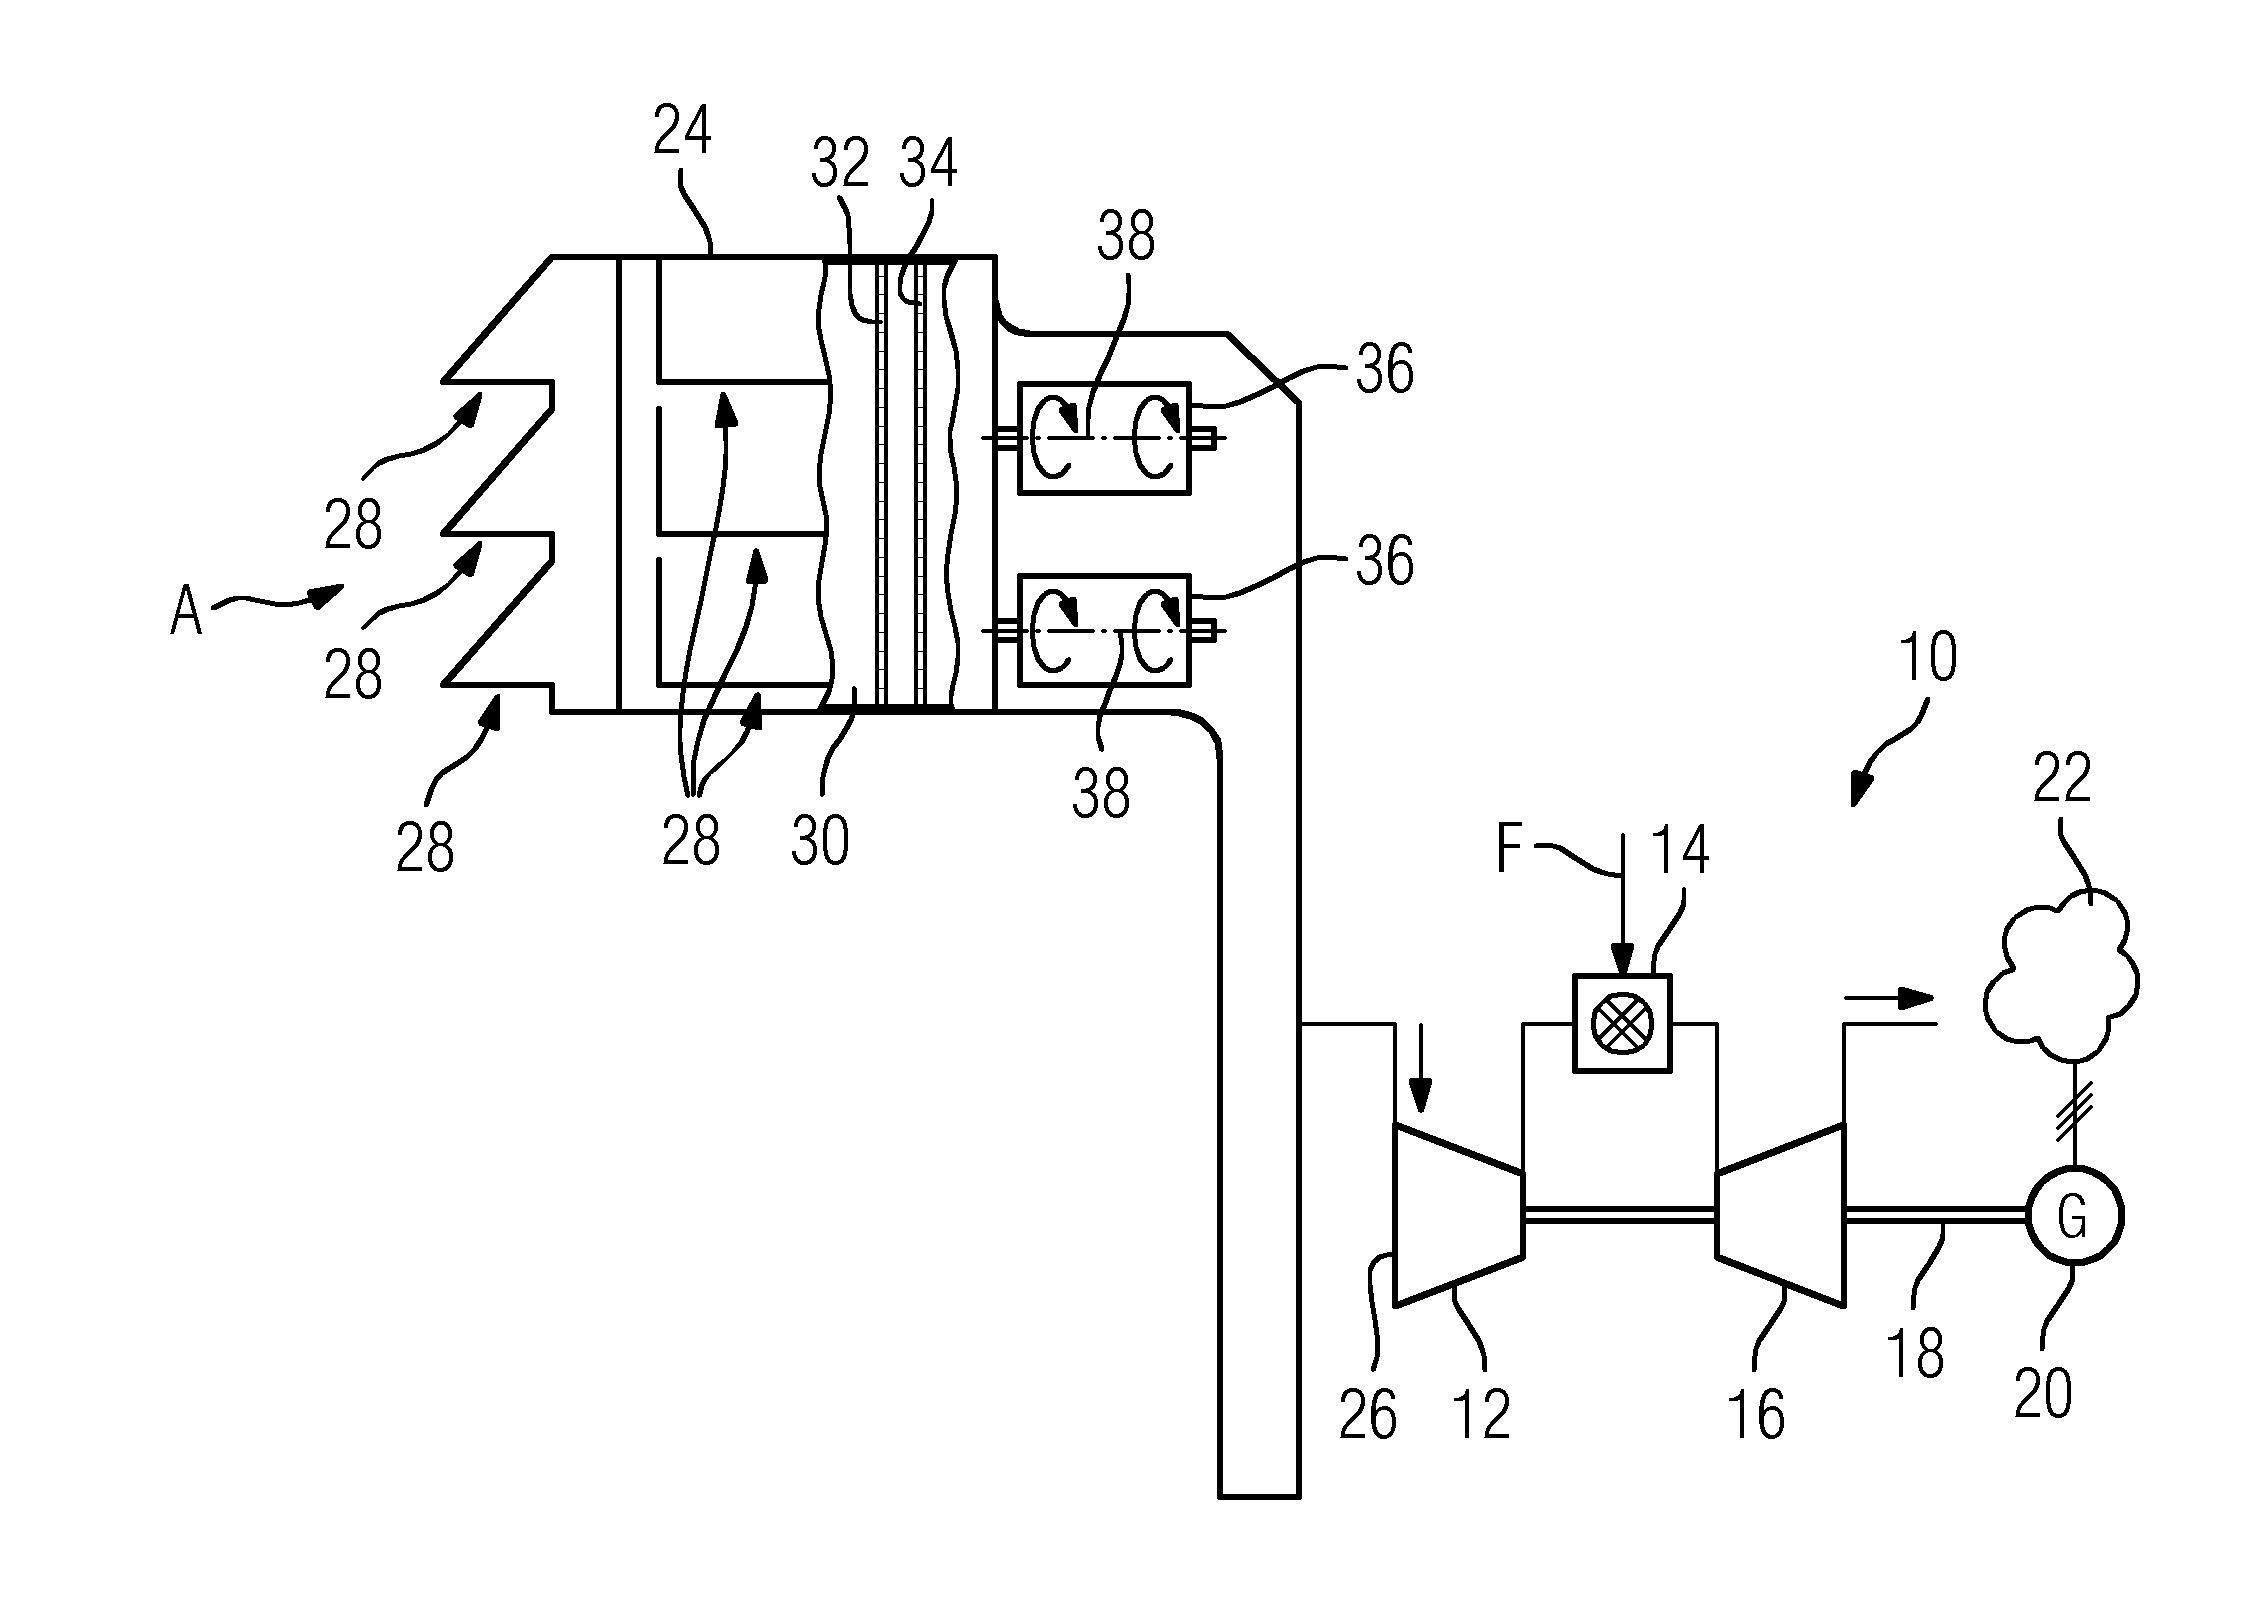 Method for operating a static gas turbine, and intake duct for intake air of a gas turbine